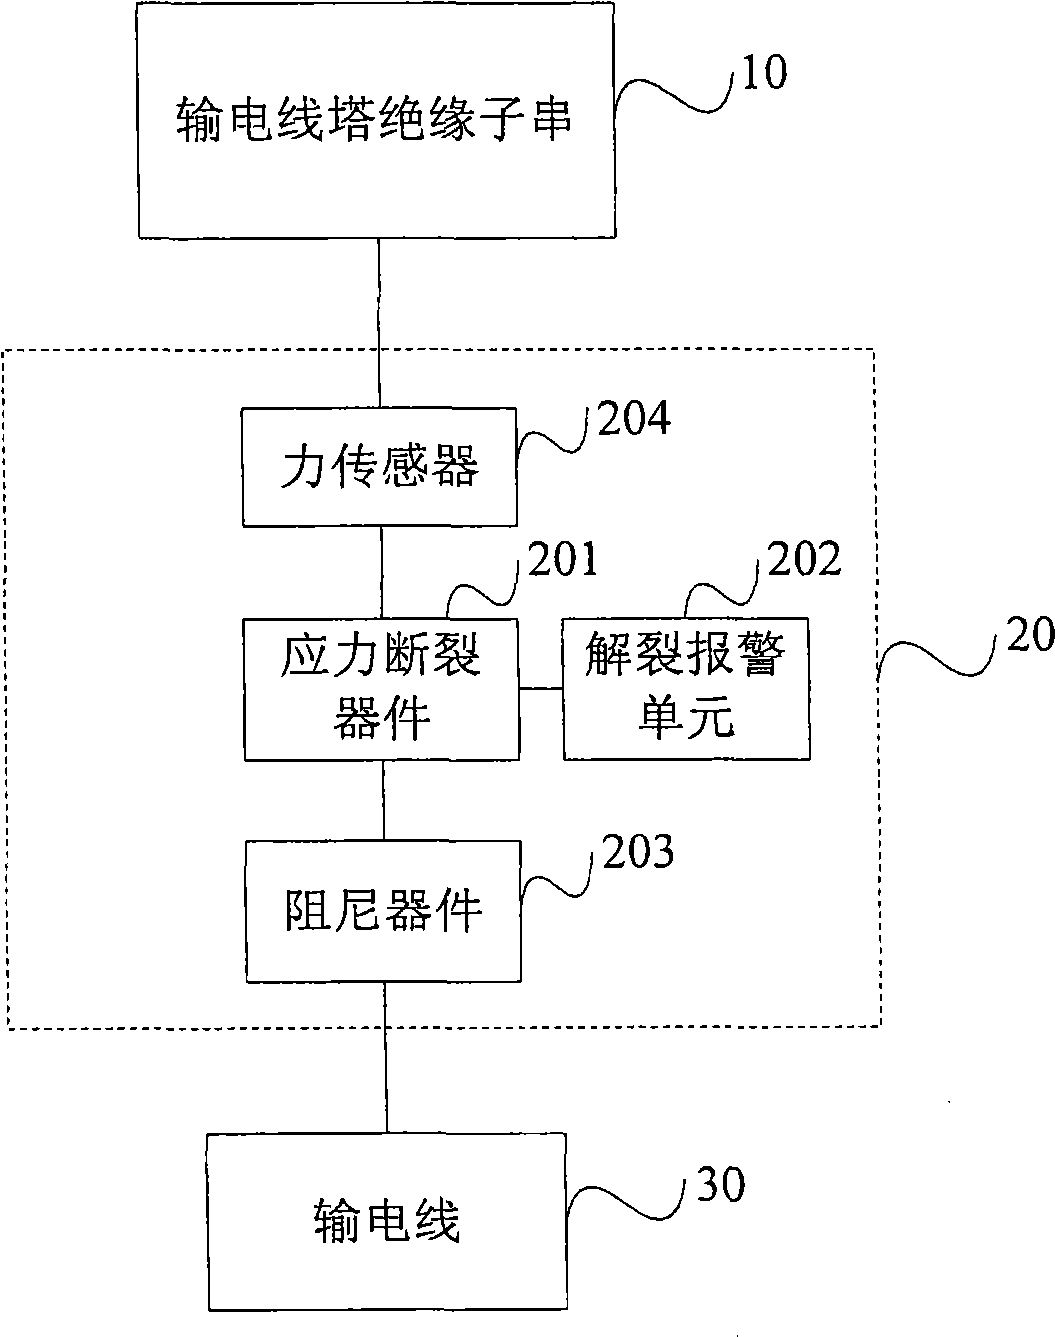 Protecting method, device and system for electric power pylon